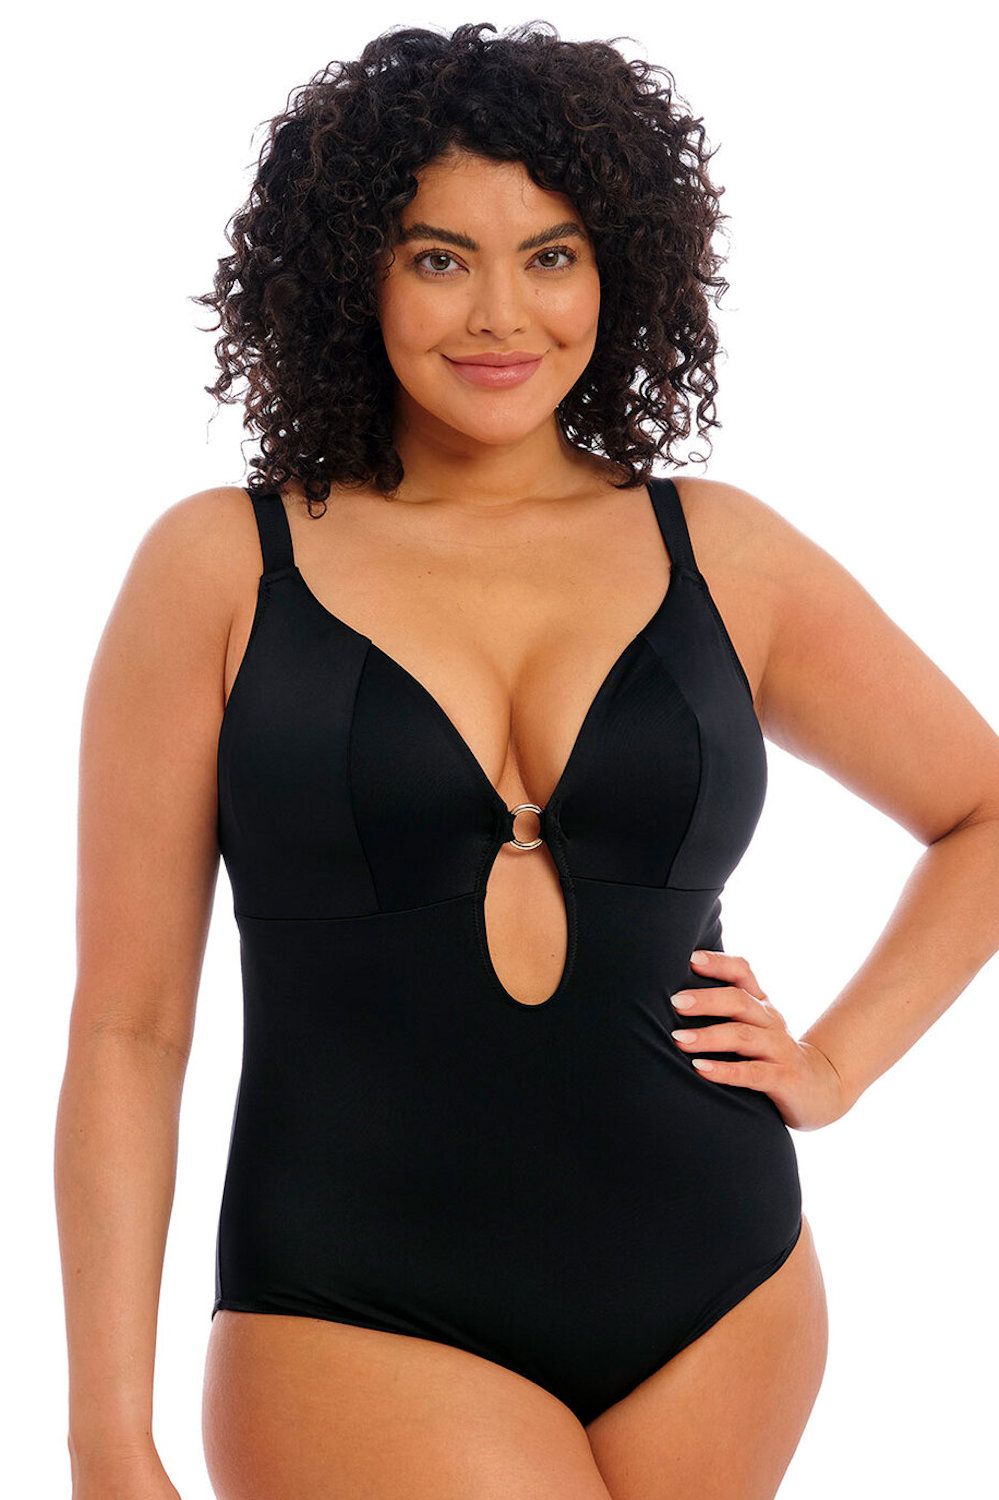 Elomi Plain Sailing Non-Wired Plunge Swimsuit Black